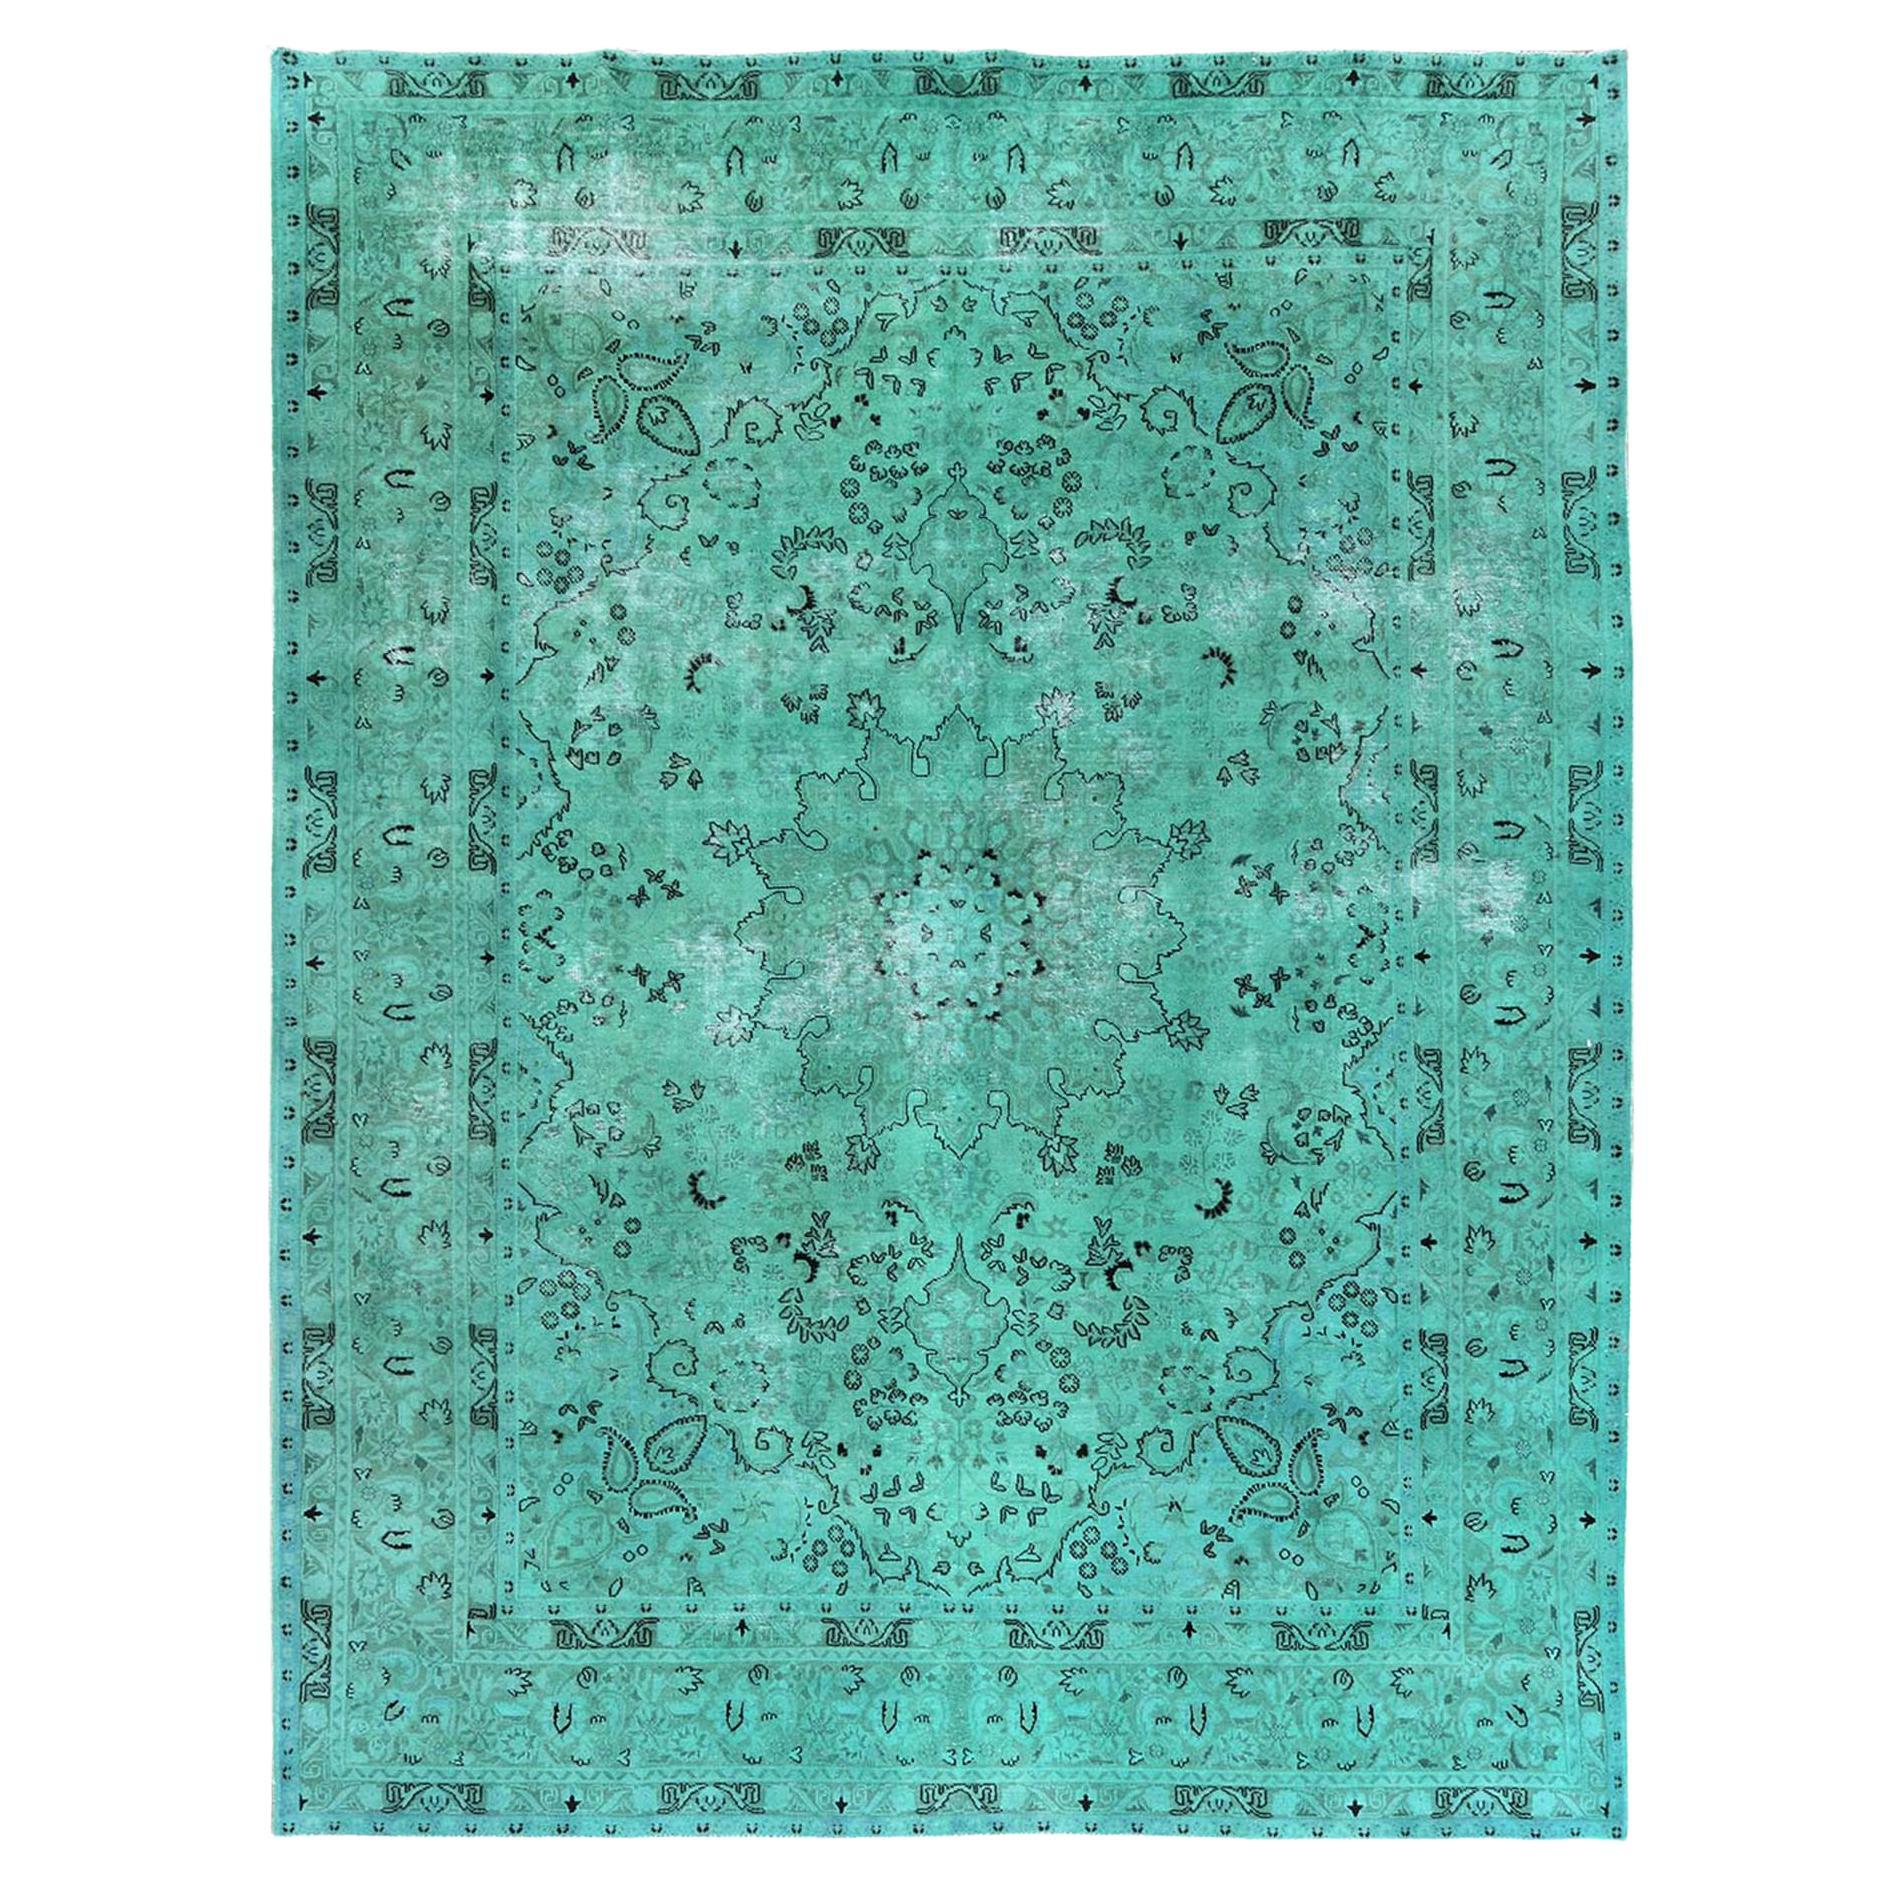 Hand Knotted Teal Green Vintage Overdyed Persian Tabriz Distressed Worn Wool Rug